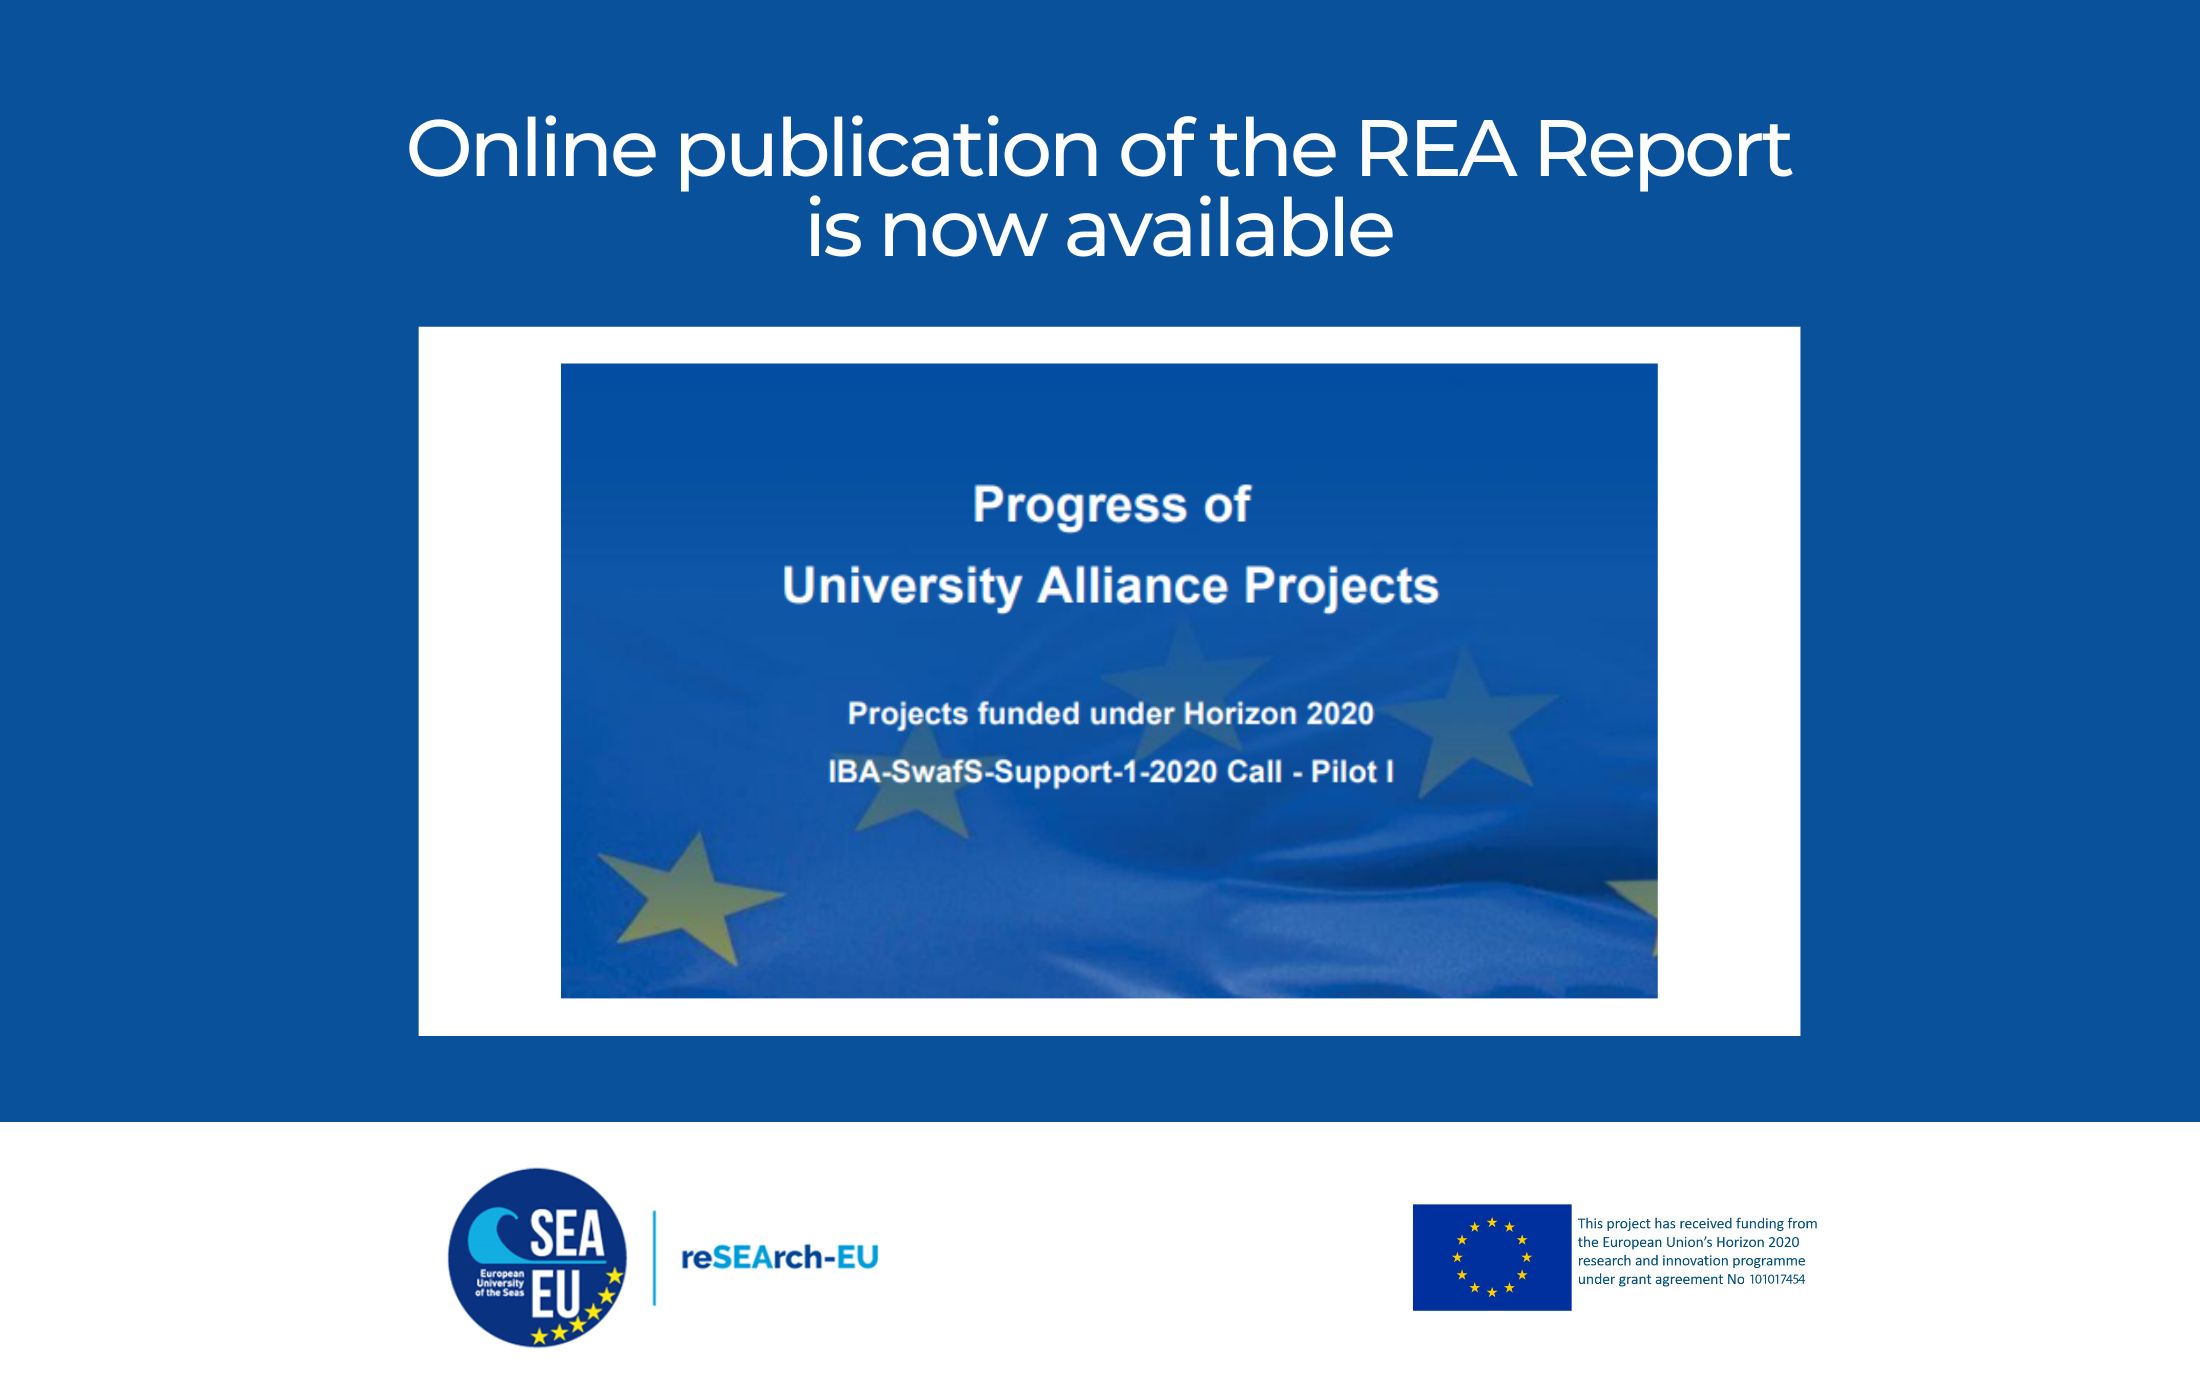 Online publication of the REA Report is now available